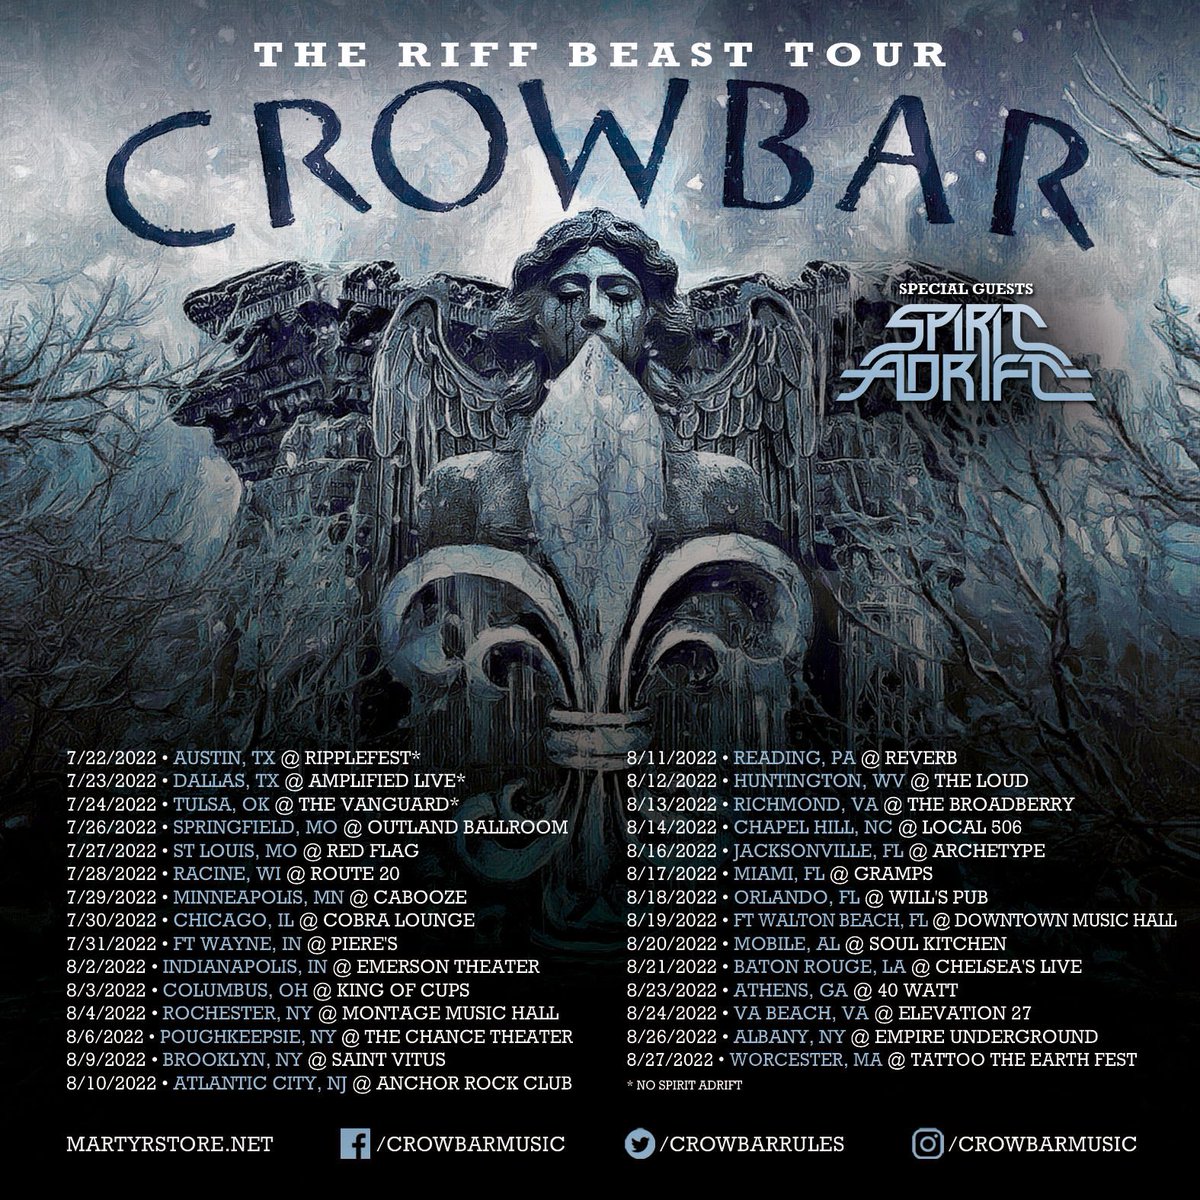 The RIFF BEAST tour announced!! What show are you coming to?! #Crowbar #NoneHeavier @spiritadrift